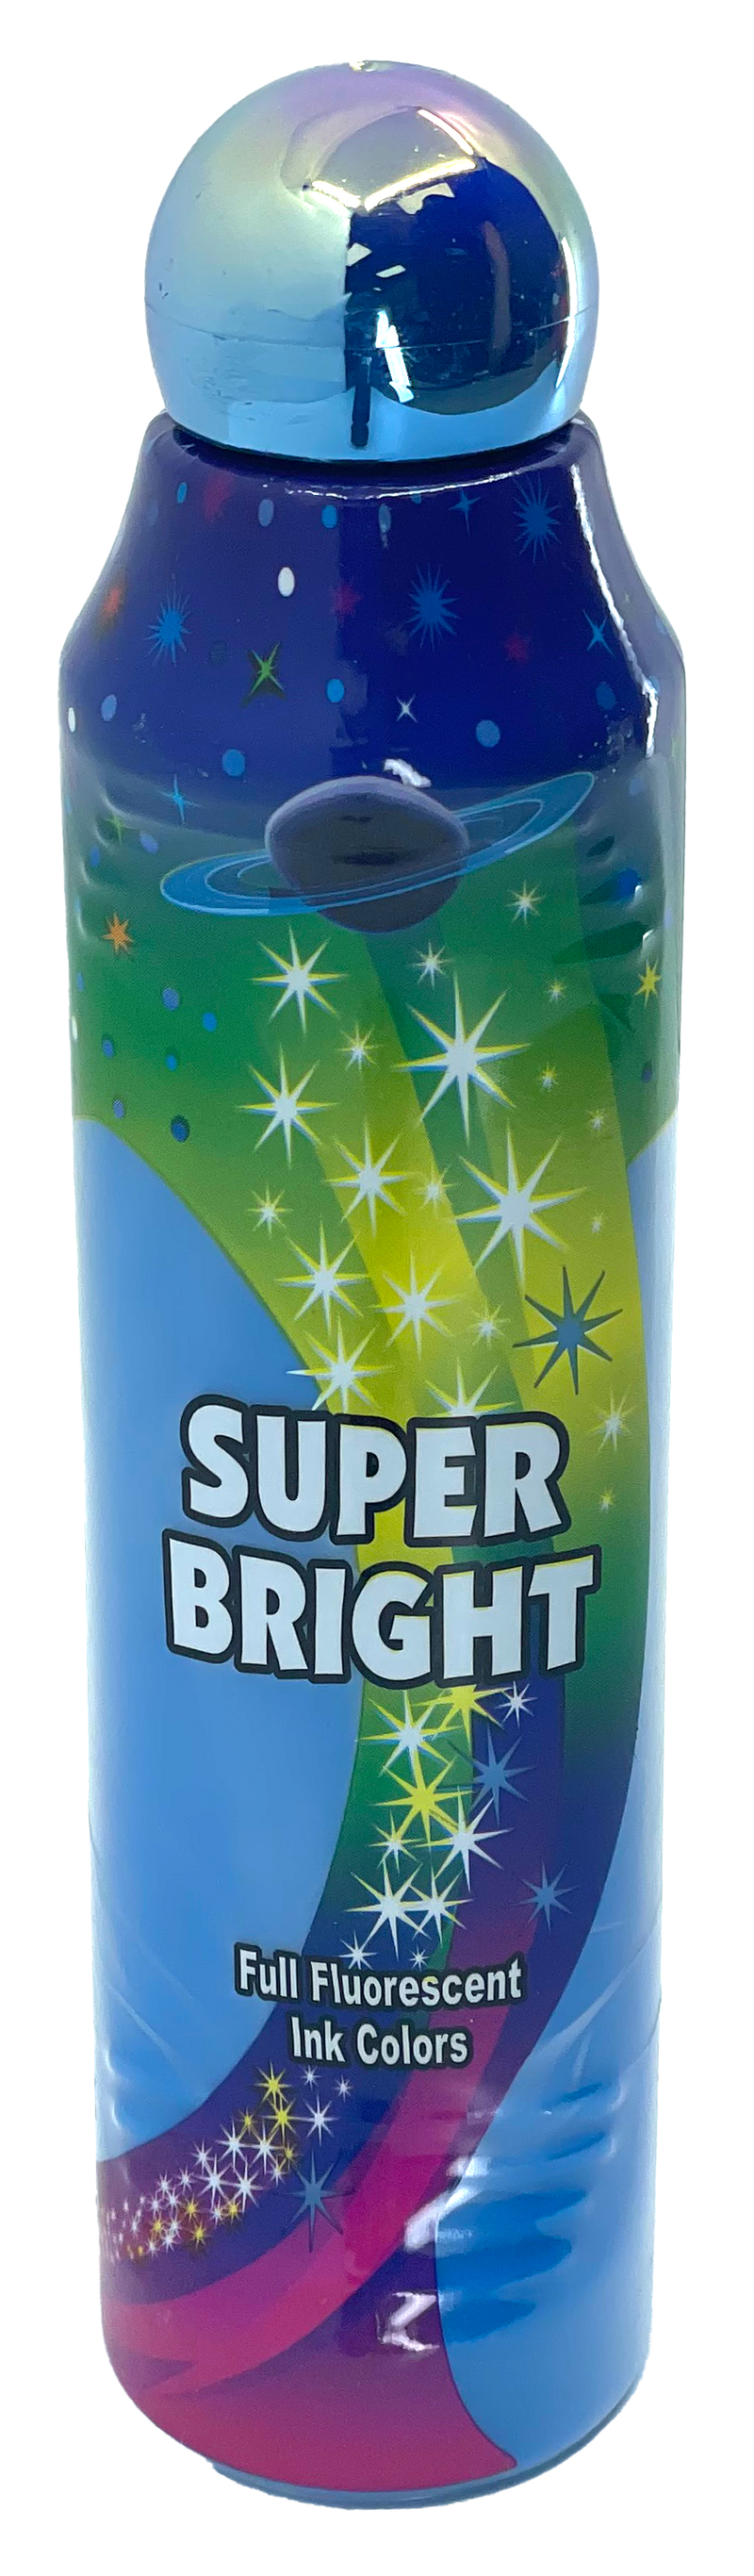 Super Bright 4 Ounce By The bottle